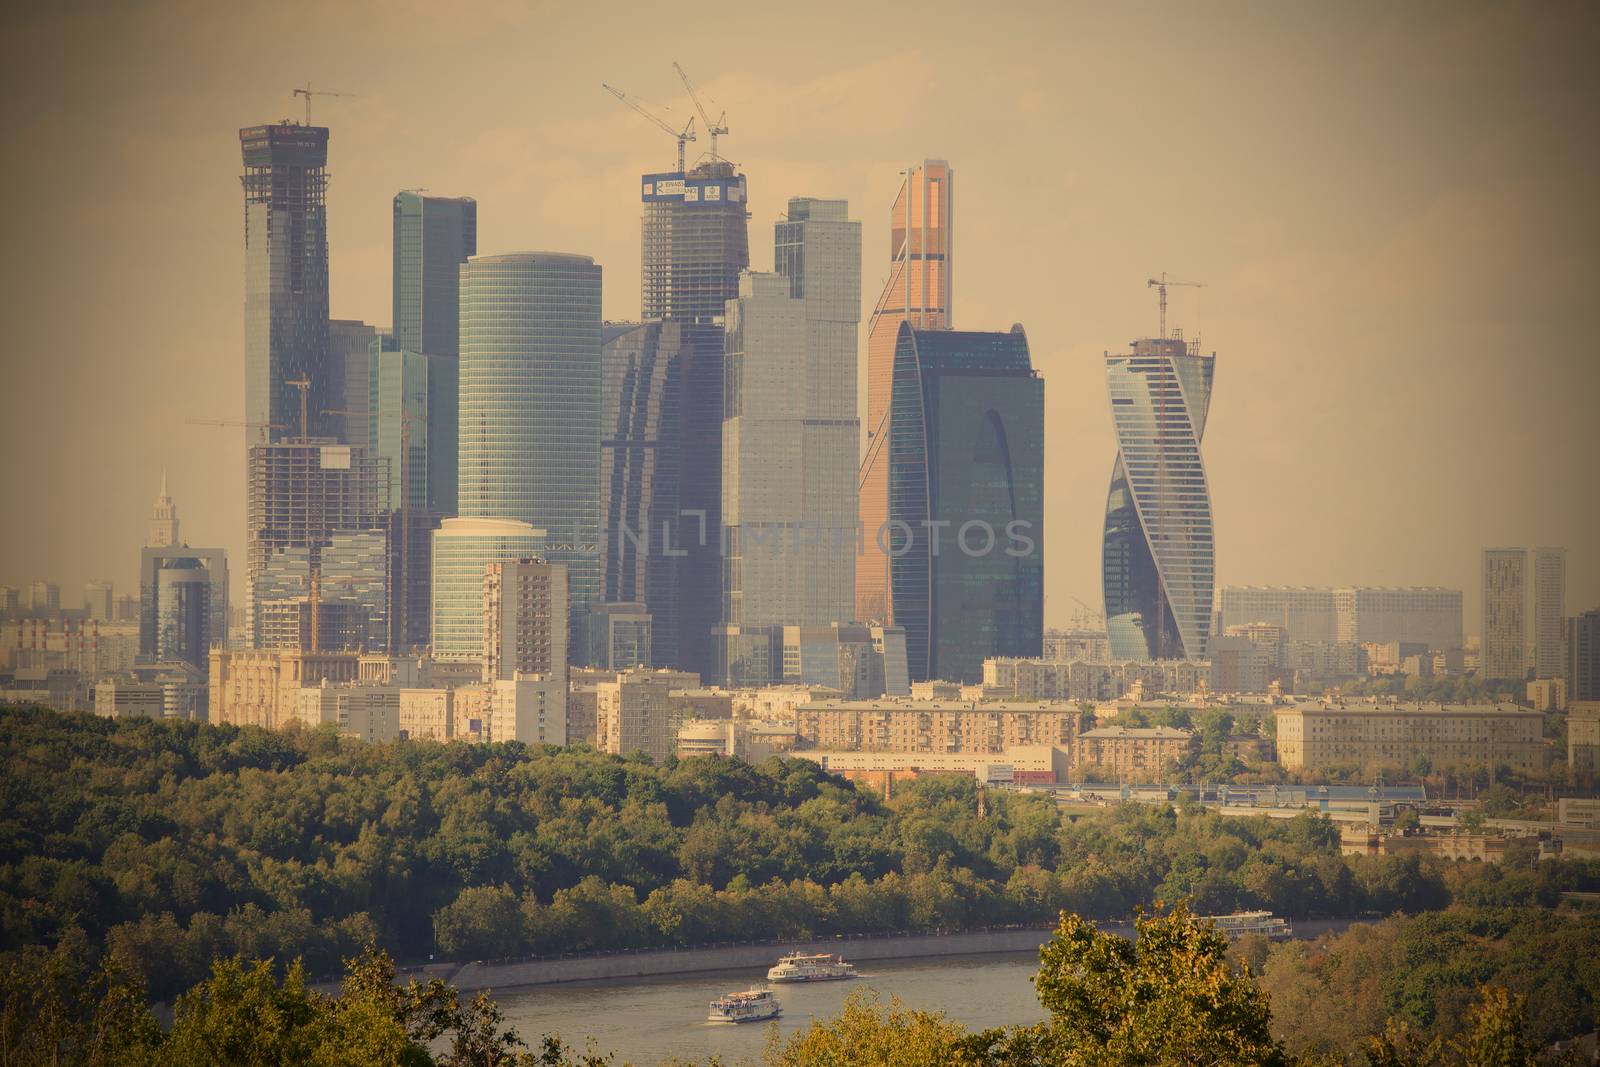 russia, moscow 21.08.2014. city panorama wit river and ships. smog over the city, instagram image style, editorial use only